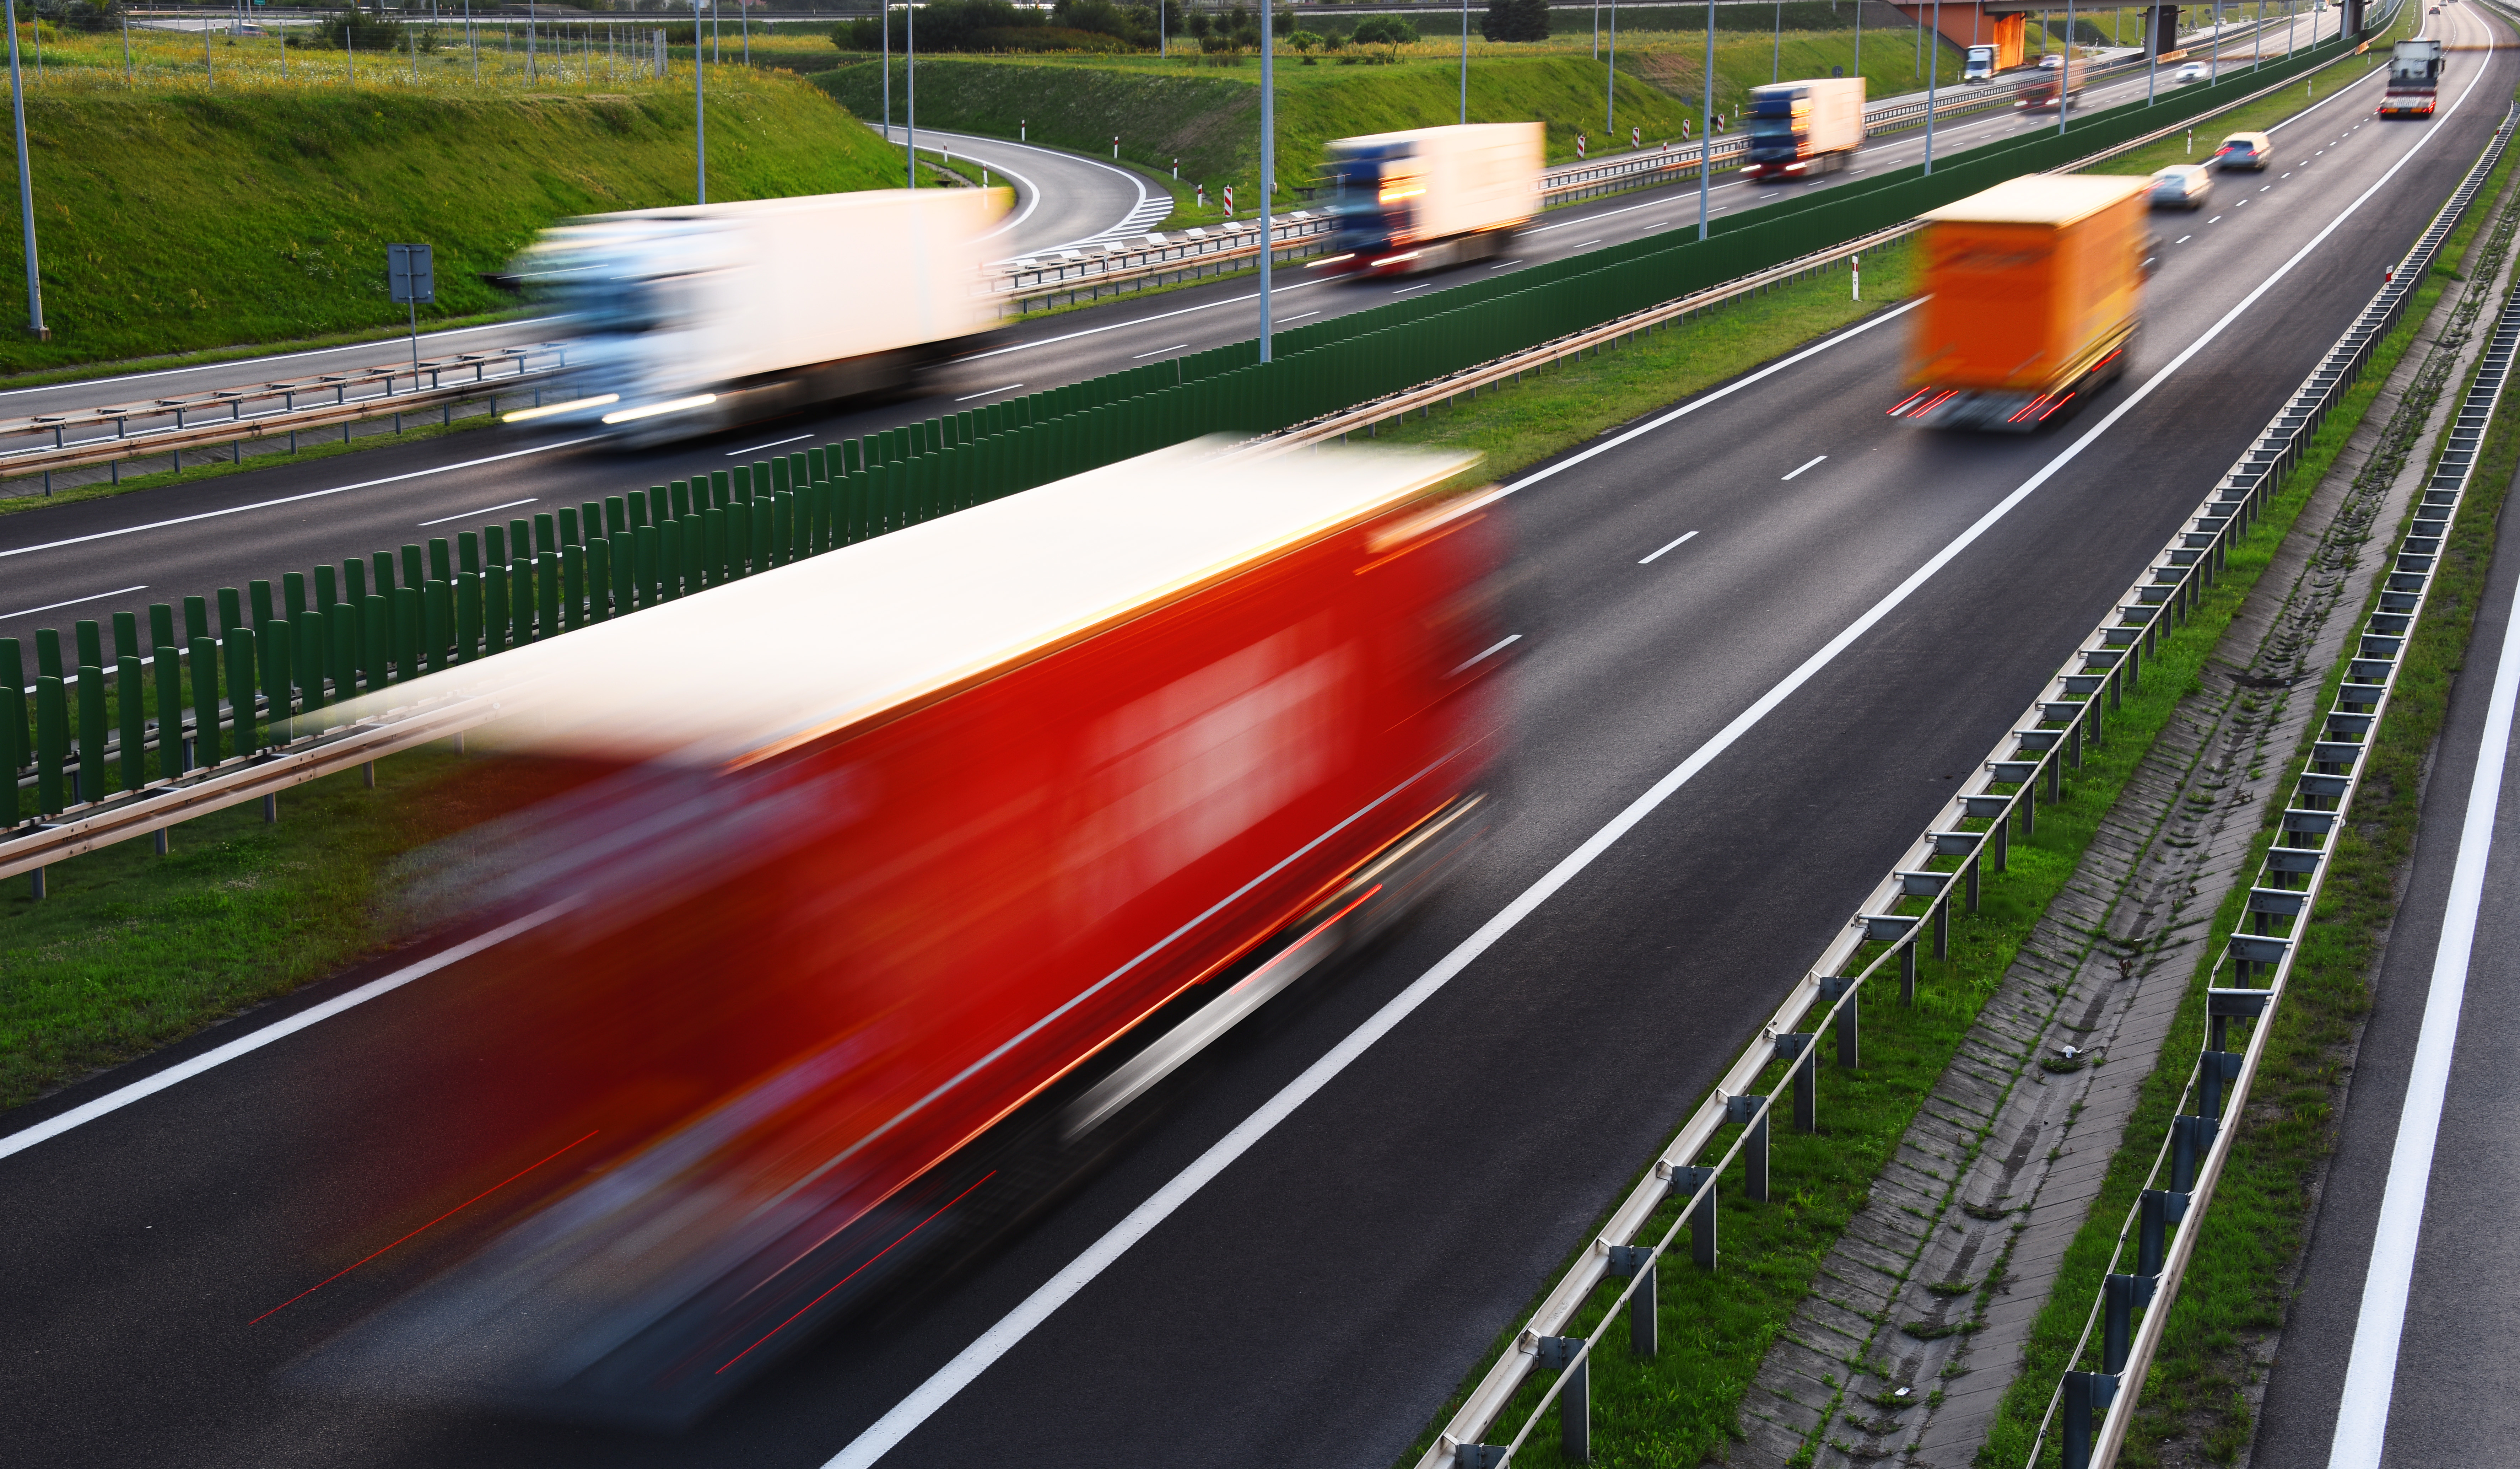 Validating Freight Carrier is Operating Legally: How-to & Why Important